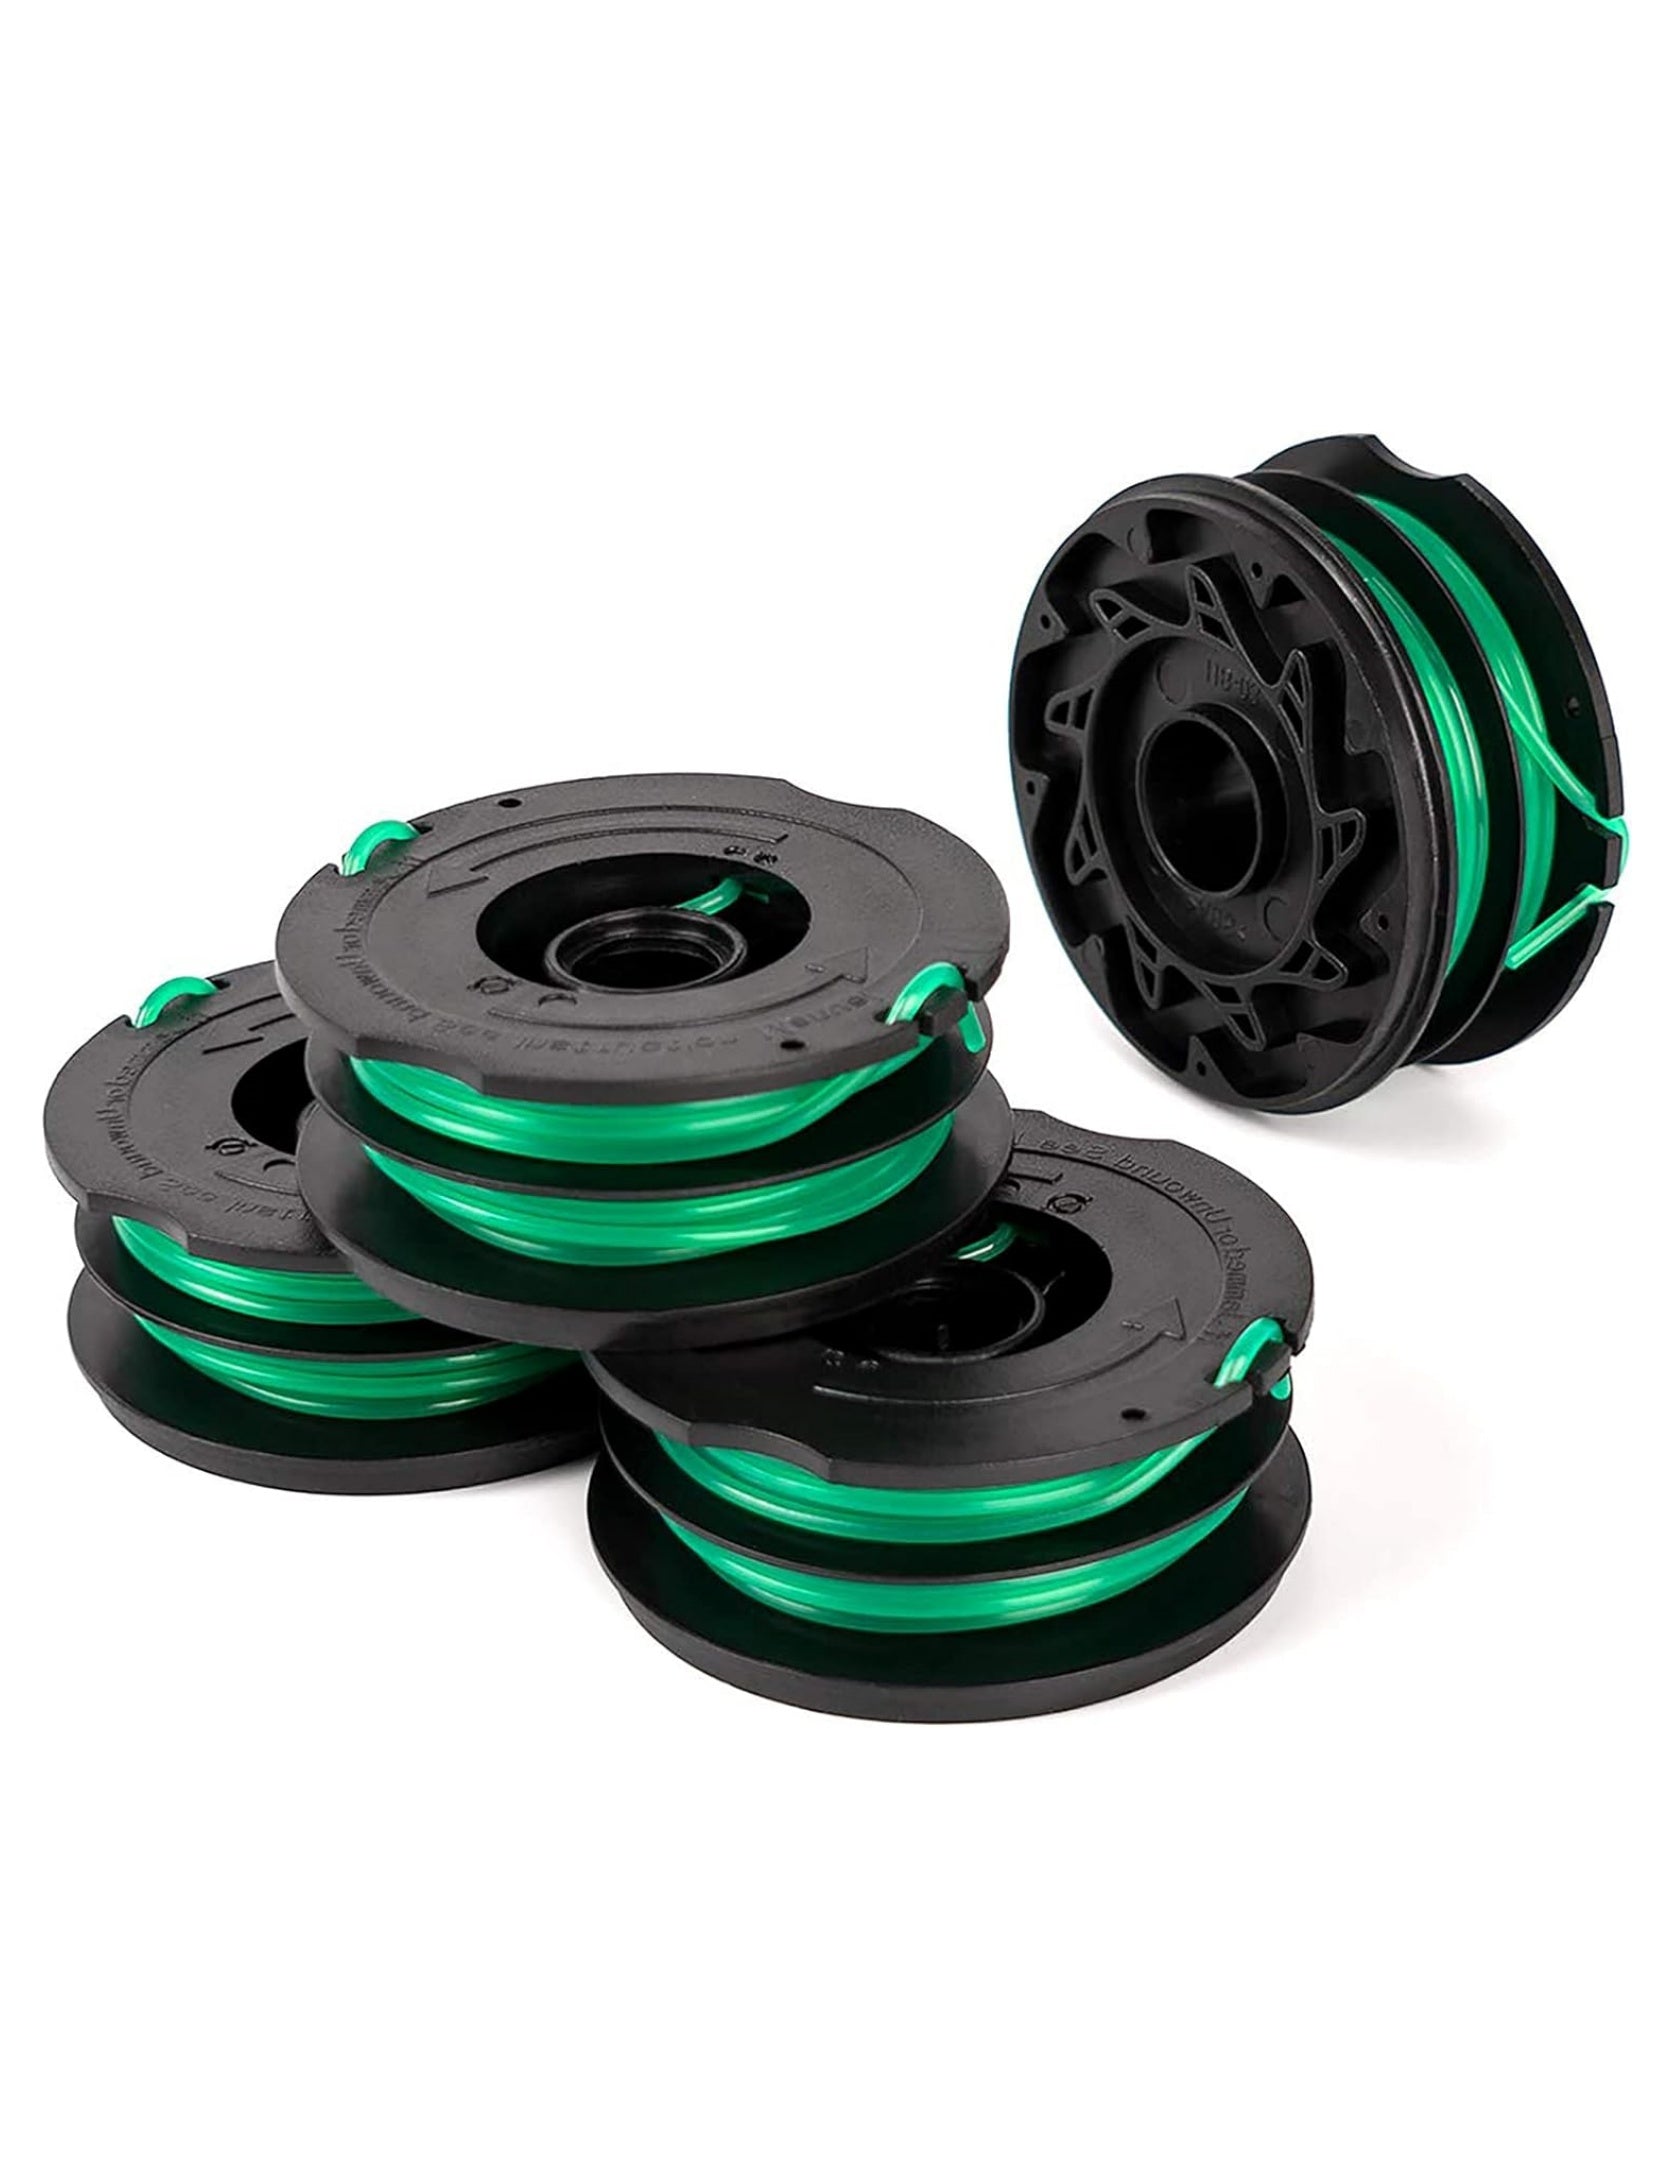 THTEN DF-080 String Trimmer Spools Compatible with Black Decker GH1100 GH1000 GH2000 Electric String Grass Trimmer Lawn Edger DF-080-BKP 30ft 0.080 Dual Auto-Feed Spool 4 Pack